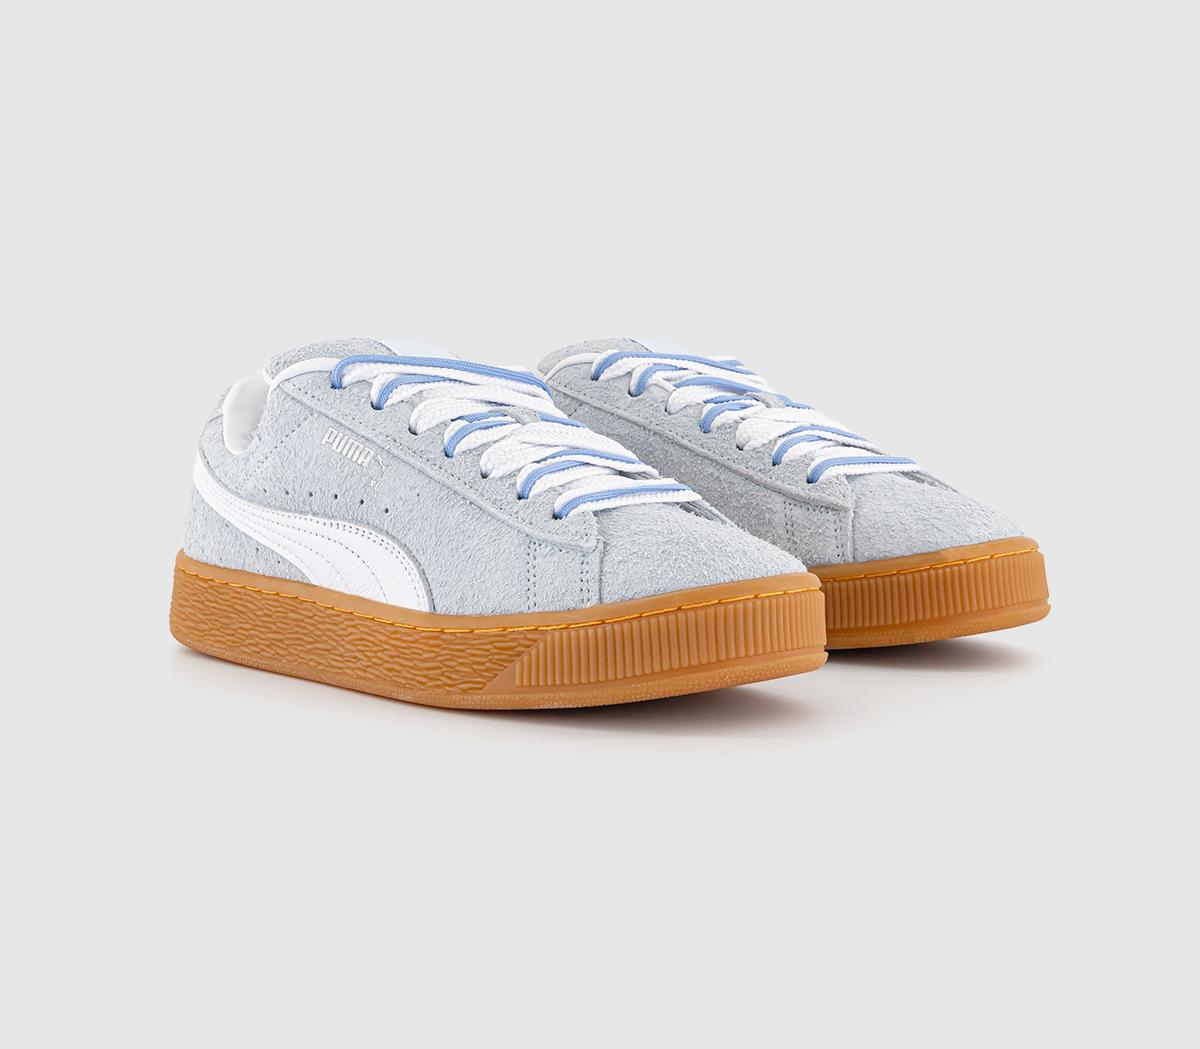 Puma Womens Suede Xl Trainers Icy Blue White Silver, 4